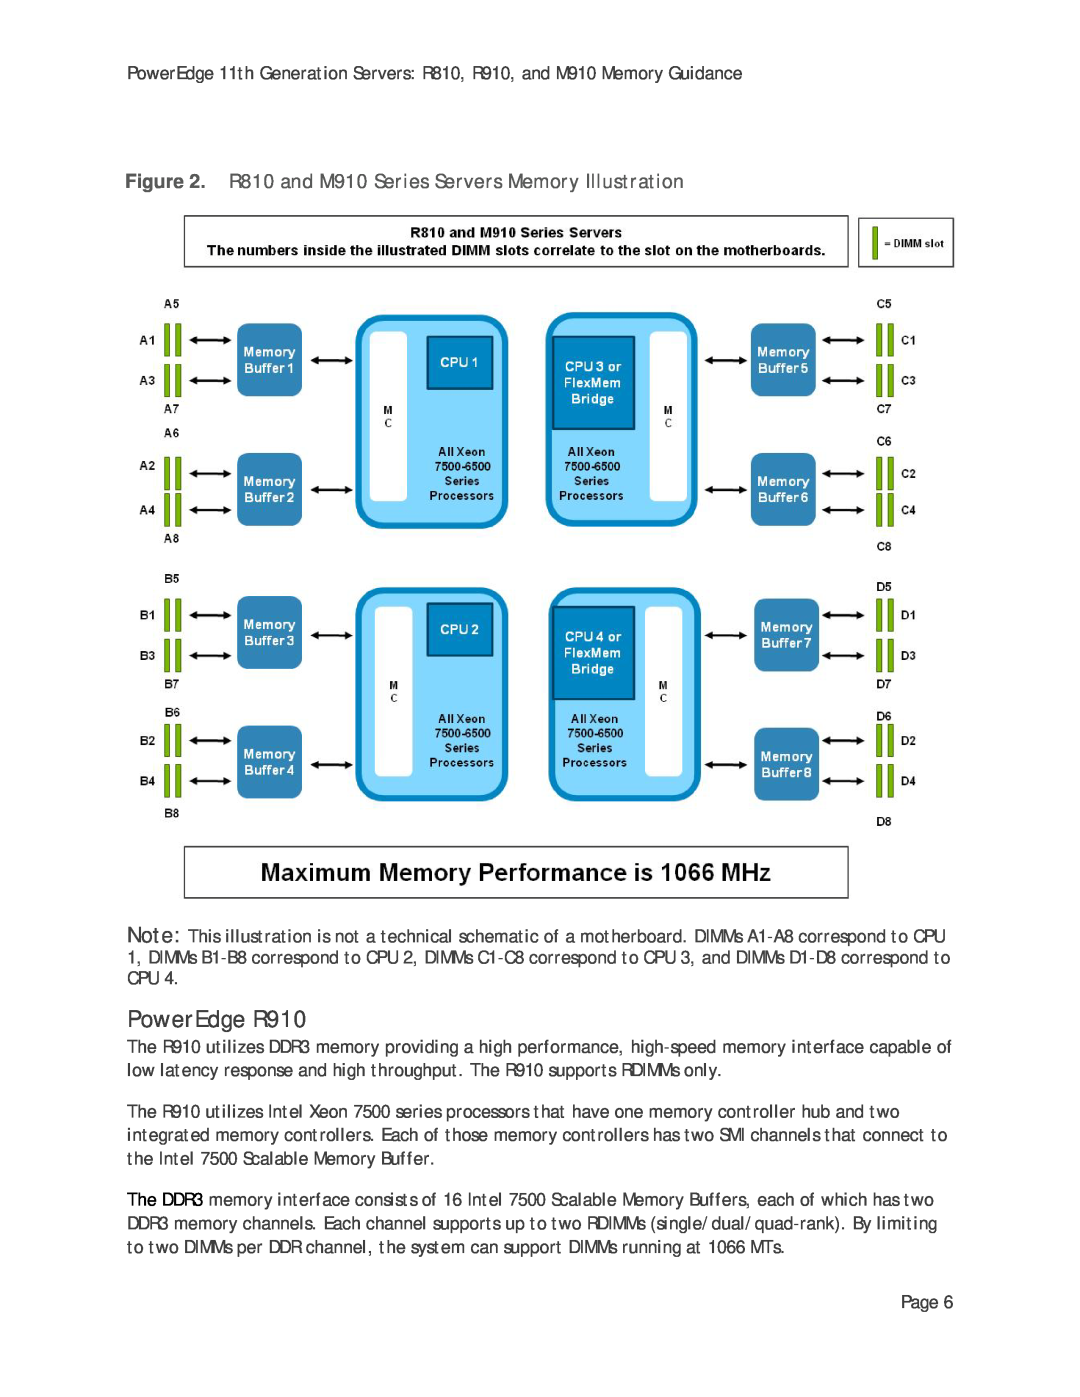 Dell manual PowerEdge R910, R810 and M910 Series Servers Memory Illustration 